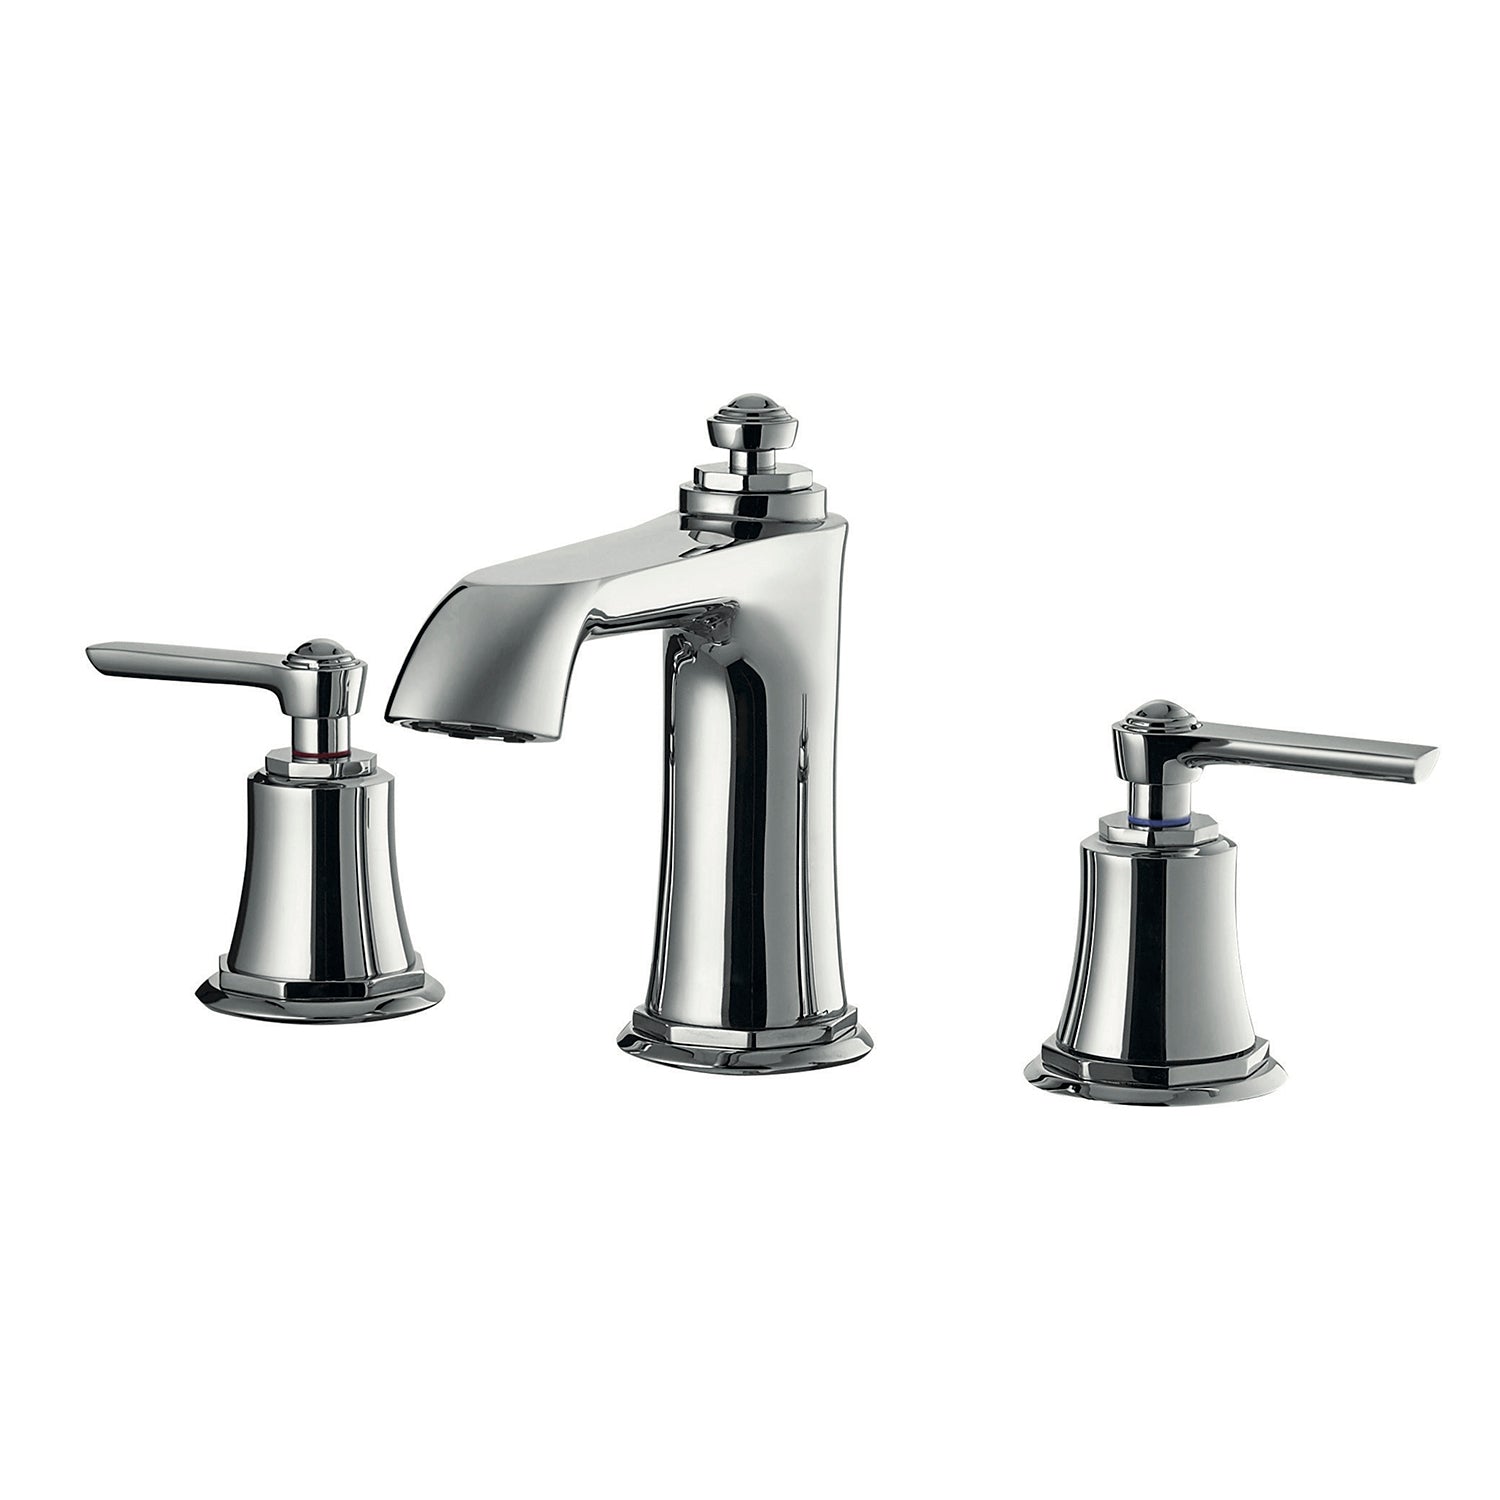 DAX Two Handle Bathroom Faucet, Brass Body, Chrome Finish, Spout Height 3-9/16 Inches (DAX-8259AC-CR)